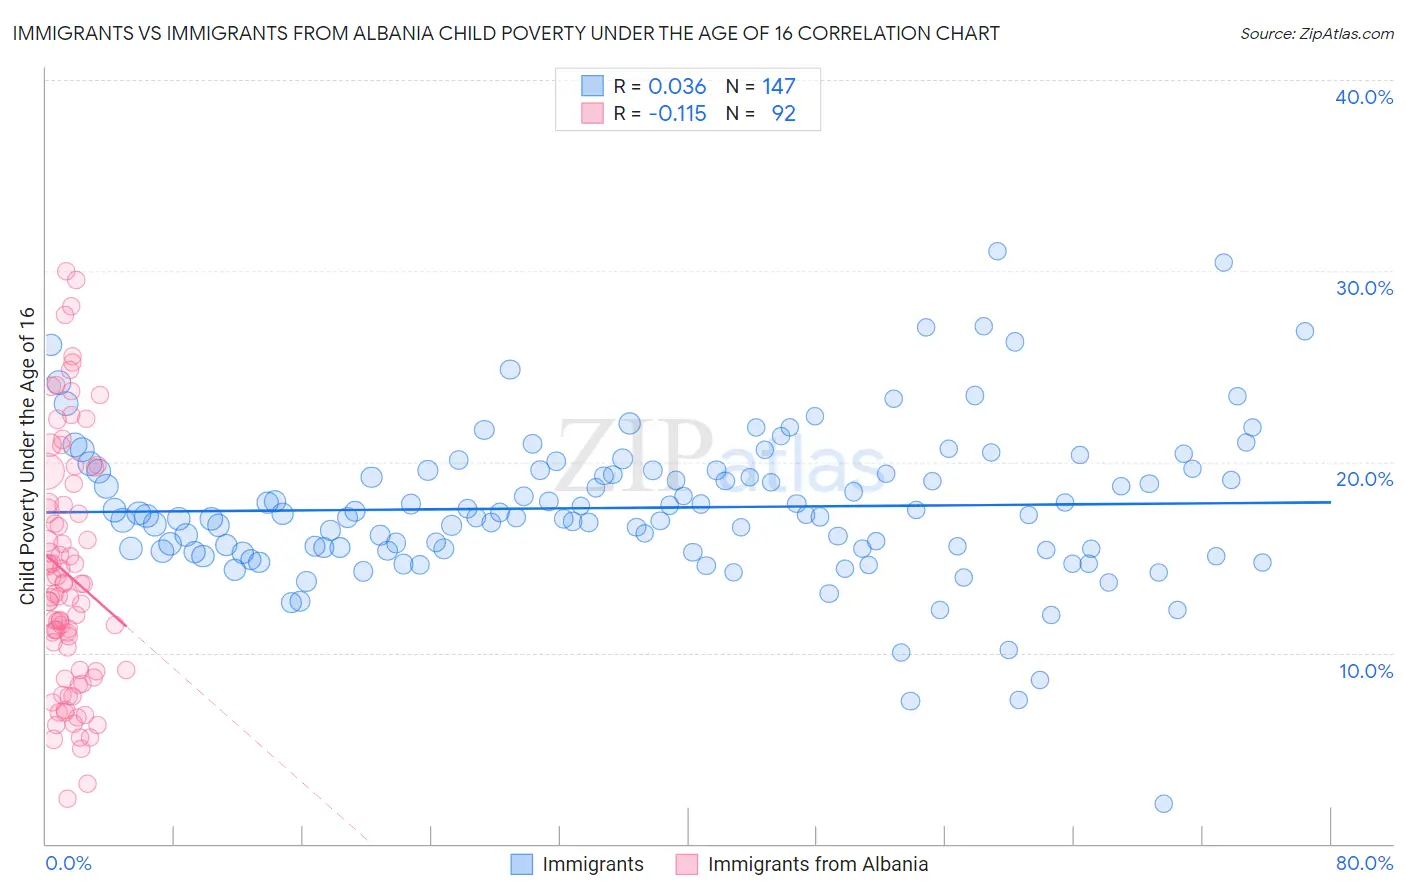 Immigrants vs Immigrants from Albania Child Poverty Under the Age of 16